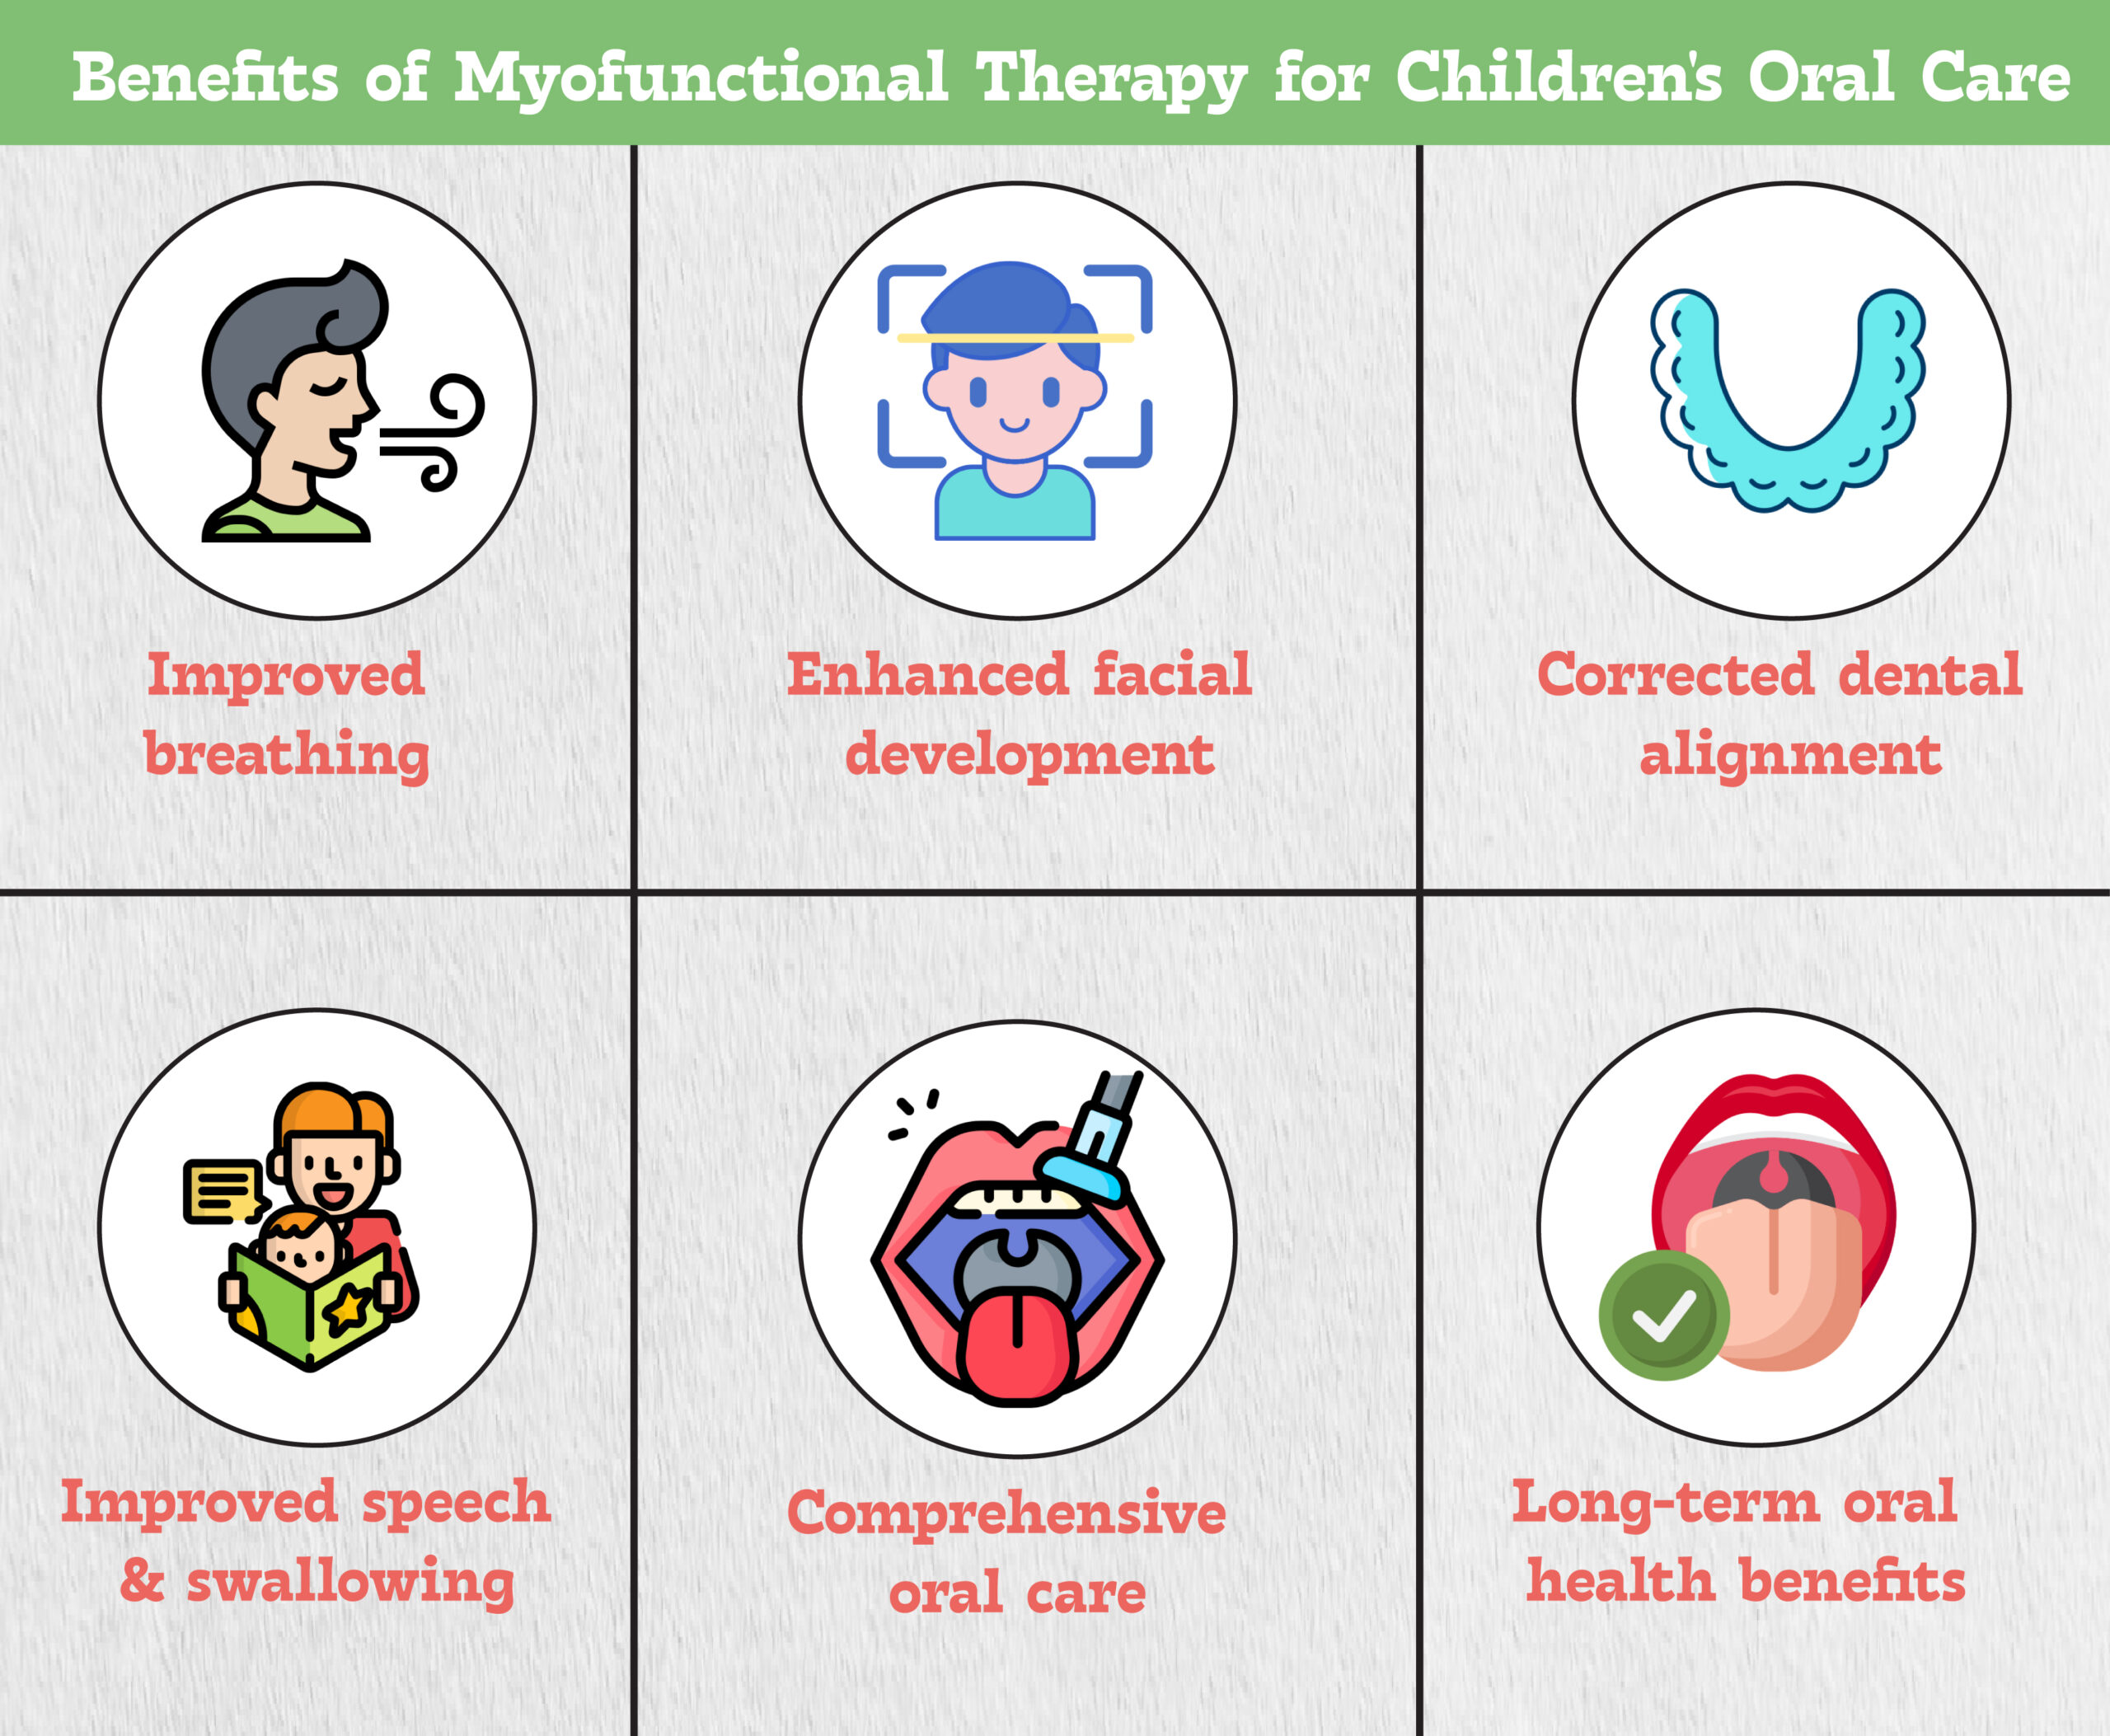 Benefits of Myofunctional Therapy for Children's